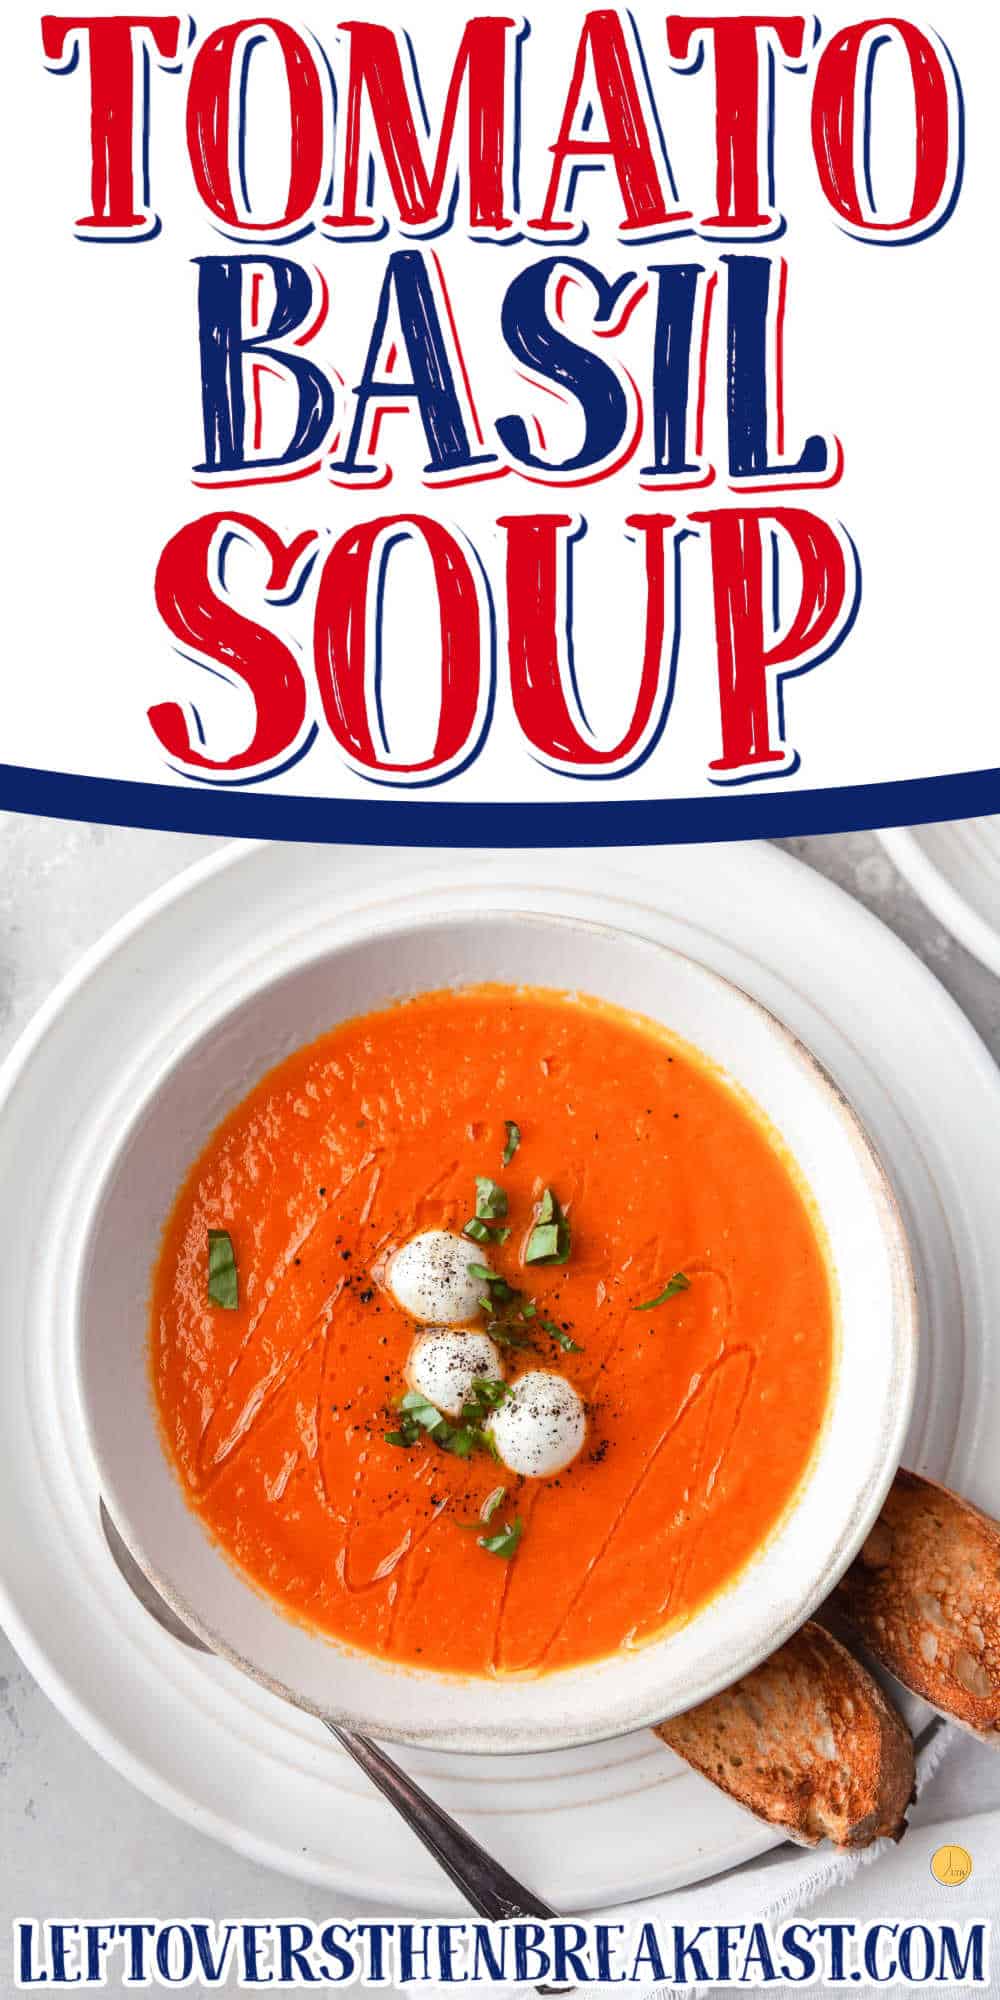 bowl of soup with text "tomato basil soup"